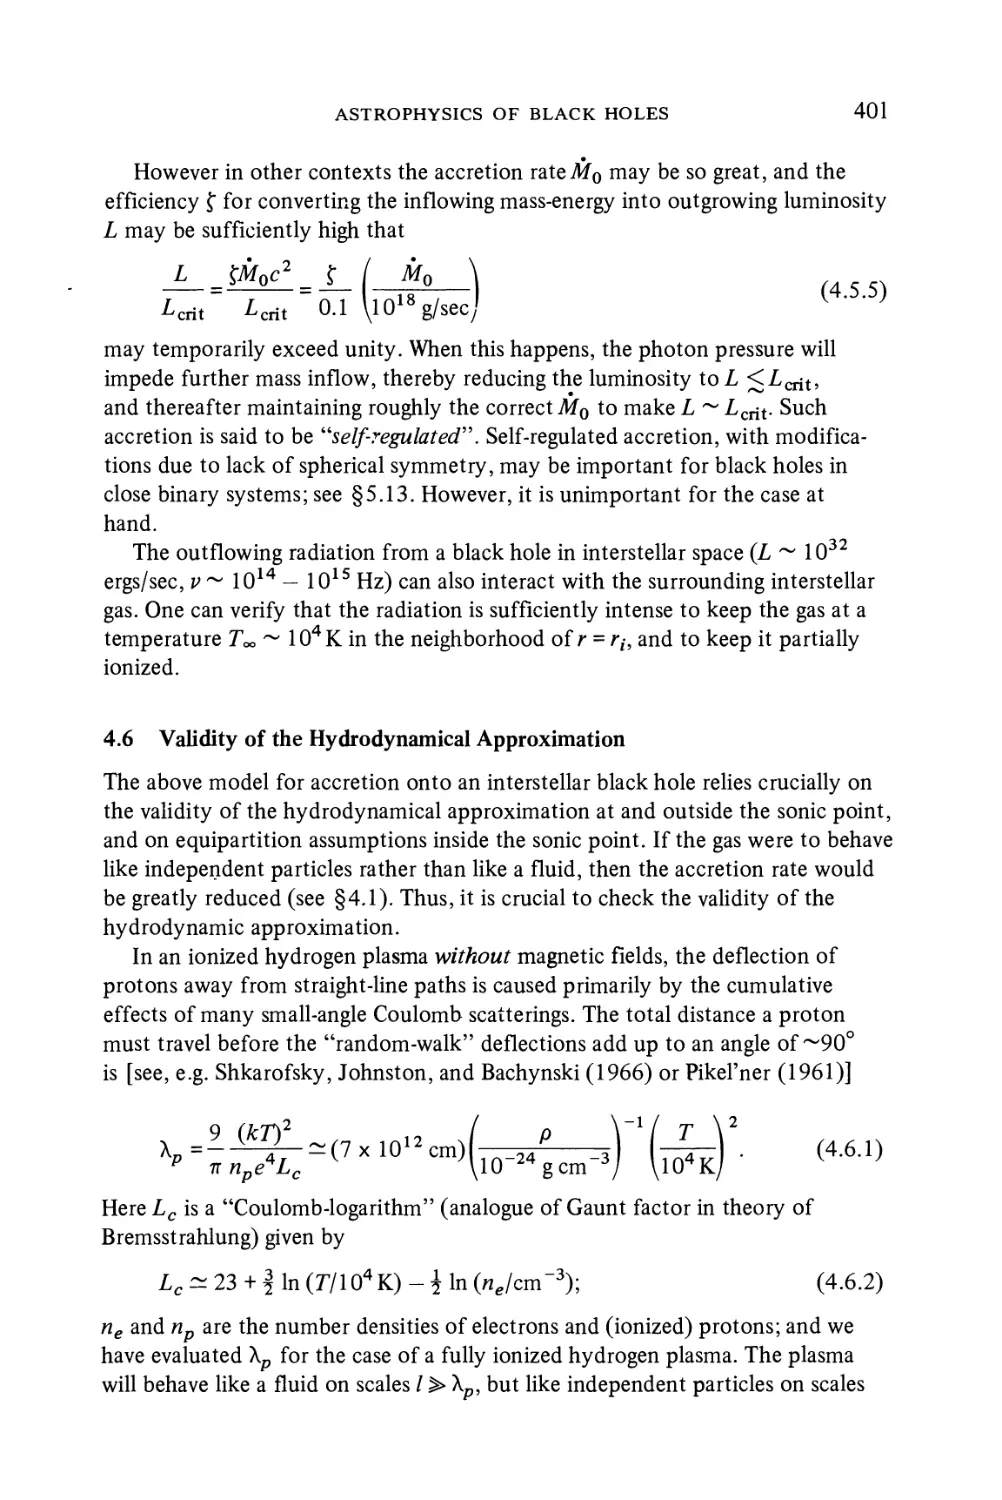 4.6 Validity of the Hydrodynamical Approximation